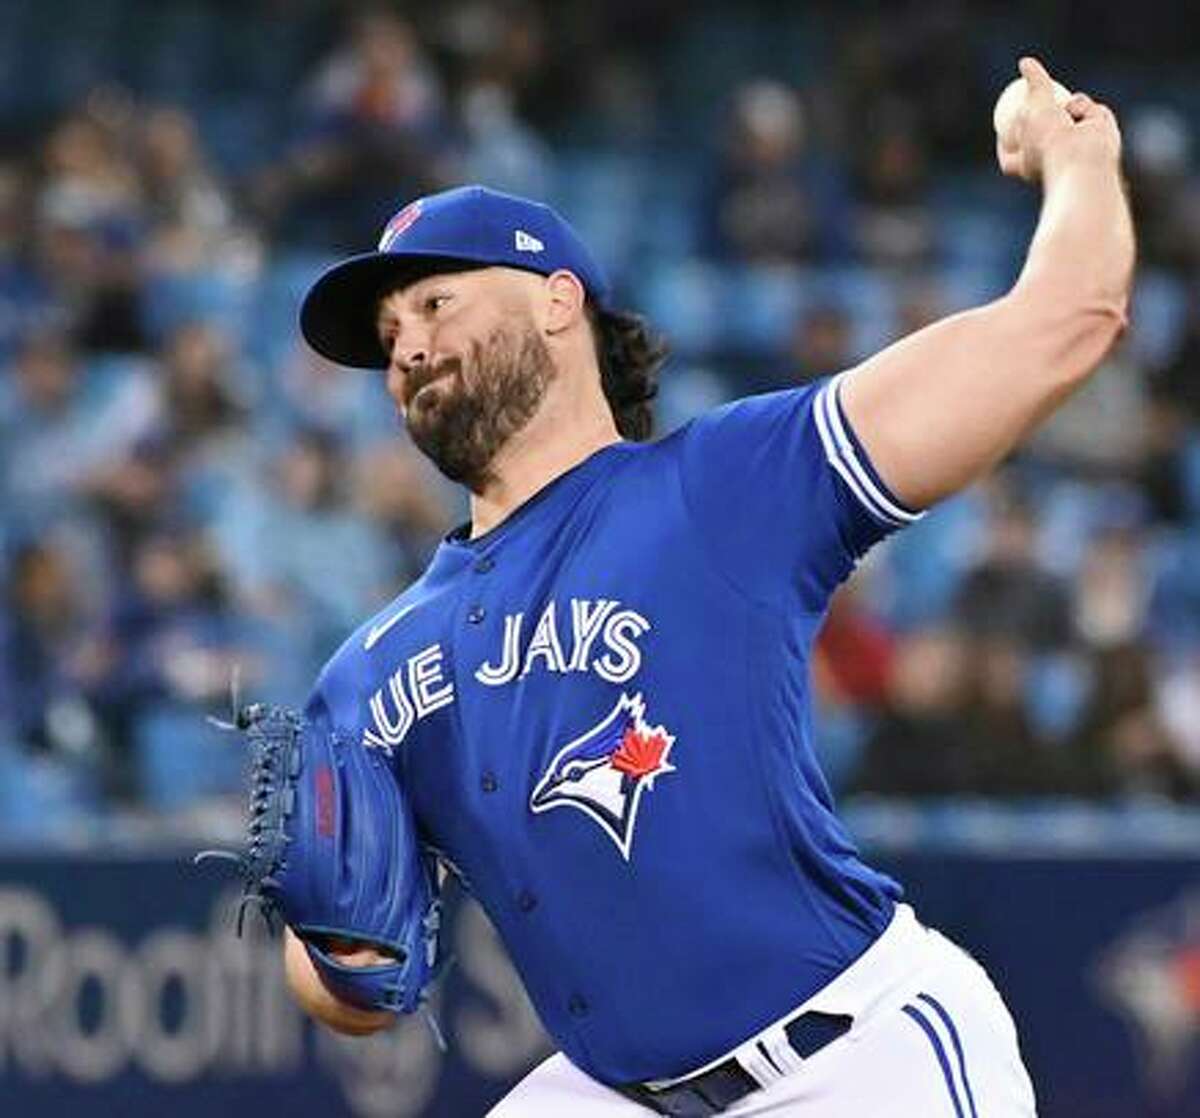 Toronto Blue Jays' Robbie Ray pitches during the the first inning of a baseball game against the New York Yankees in Toronto on Thursday, Sept. 30, 2021. (Jon Blacker/The Canadian Press via AP)